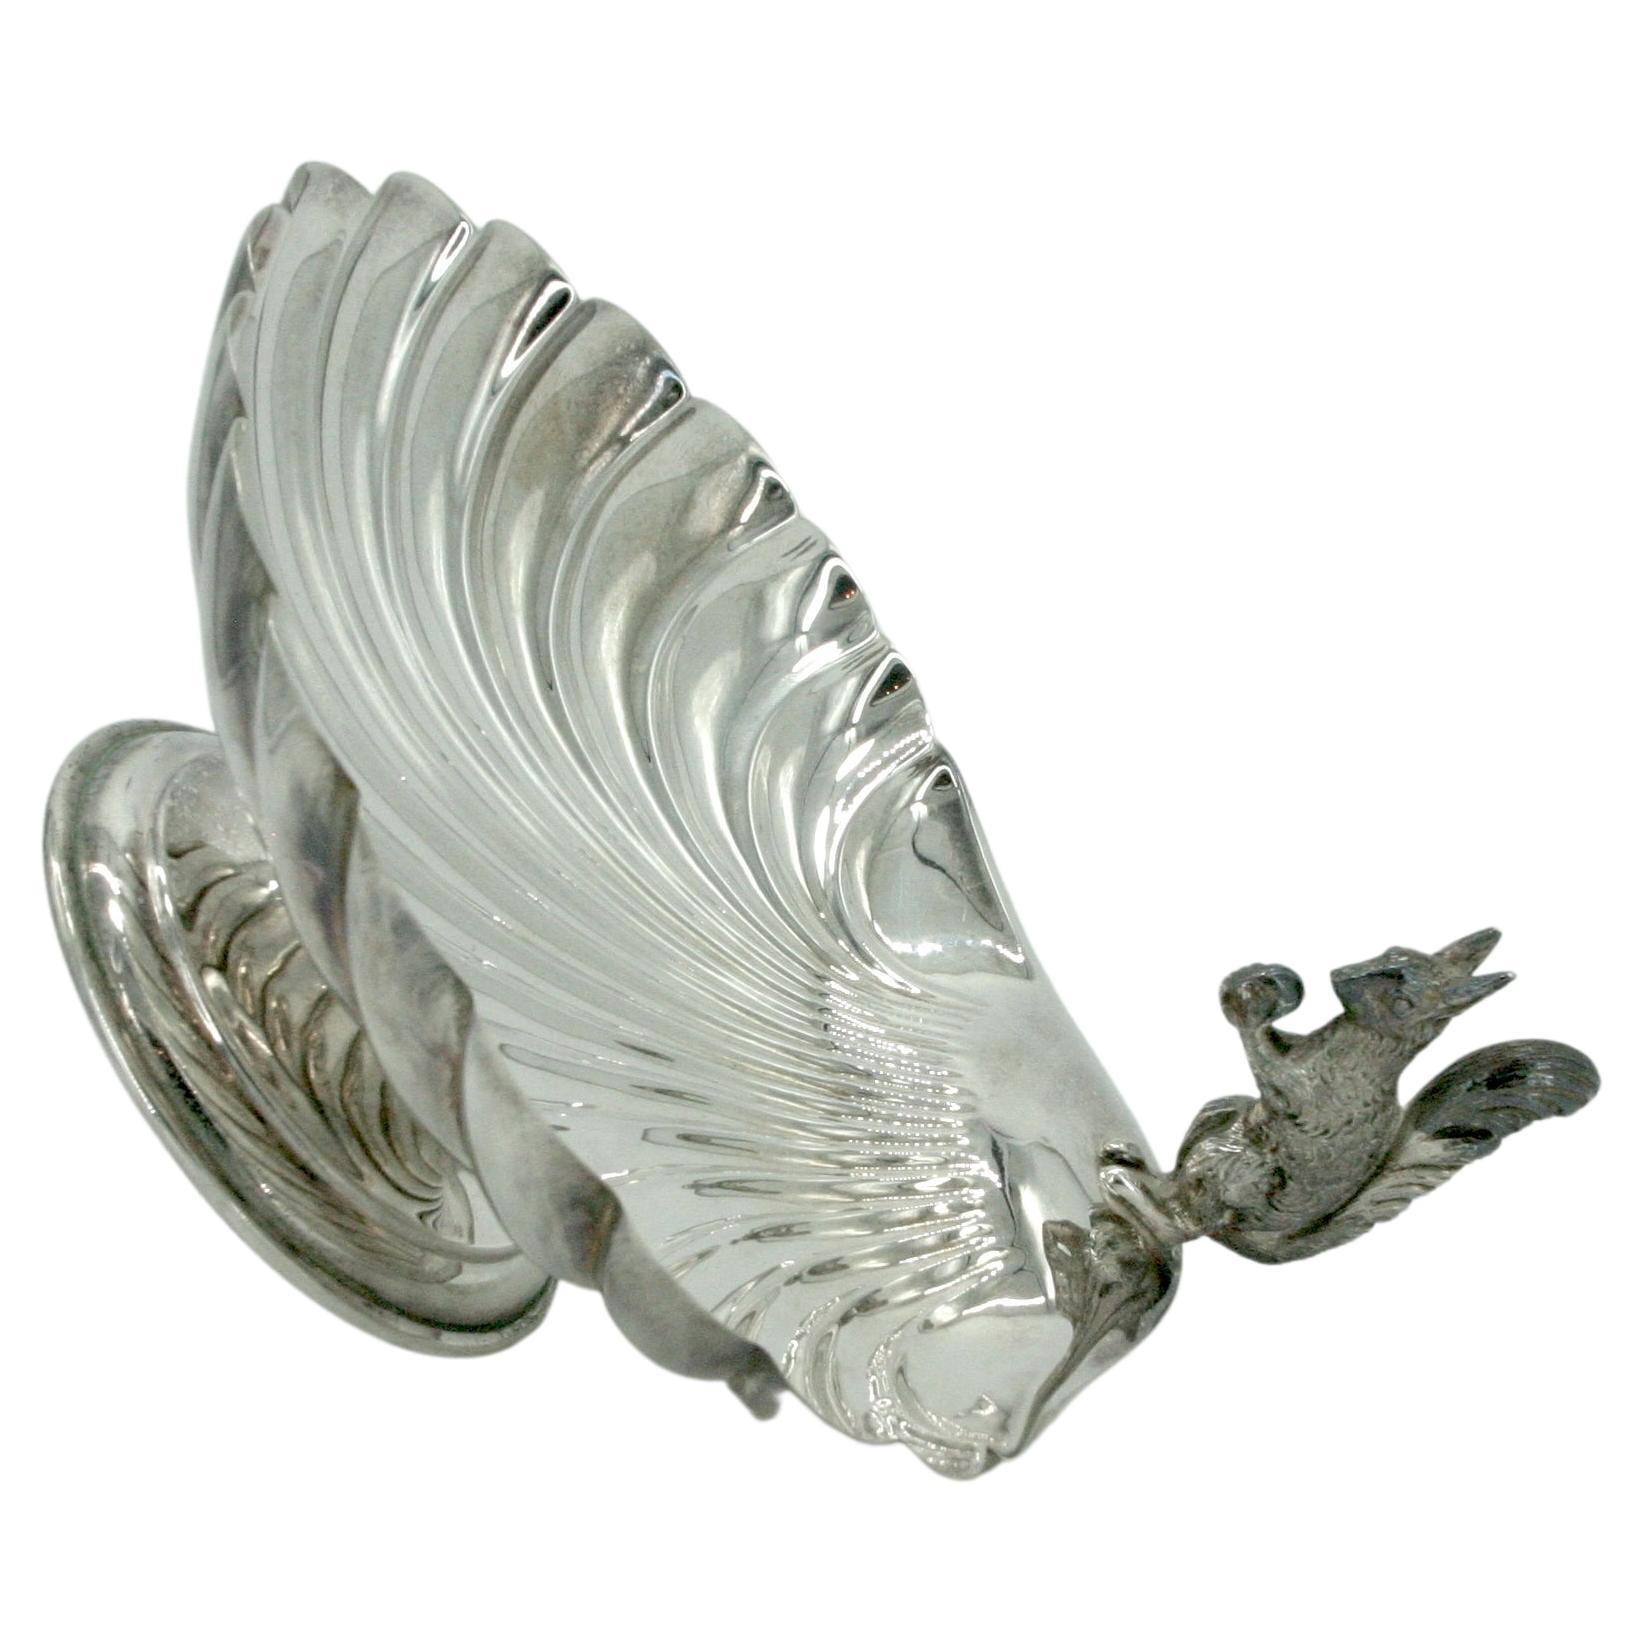 English Silver Plate Tableware Serving Piece For Sale 1